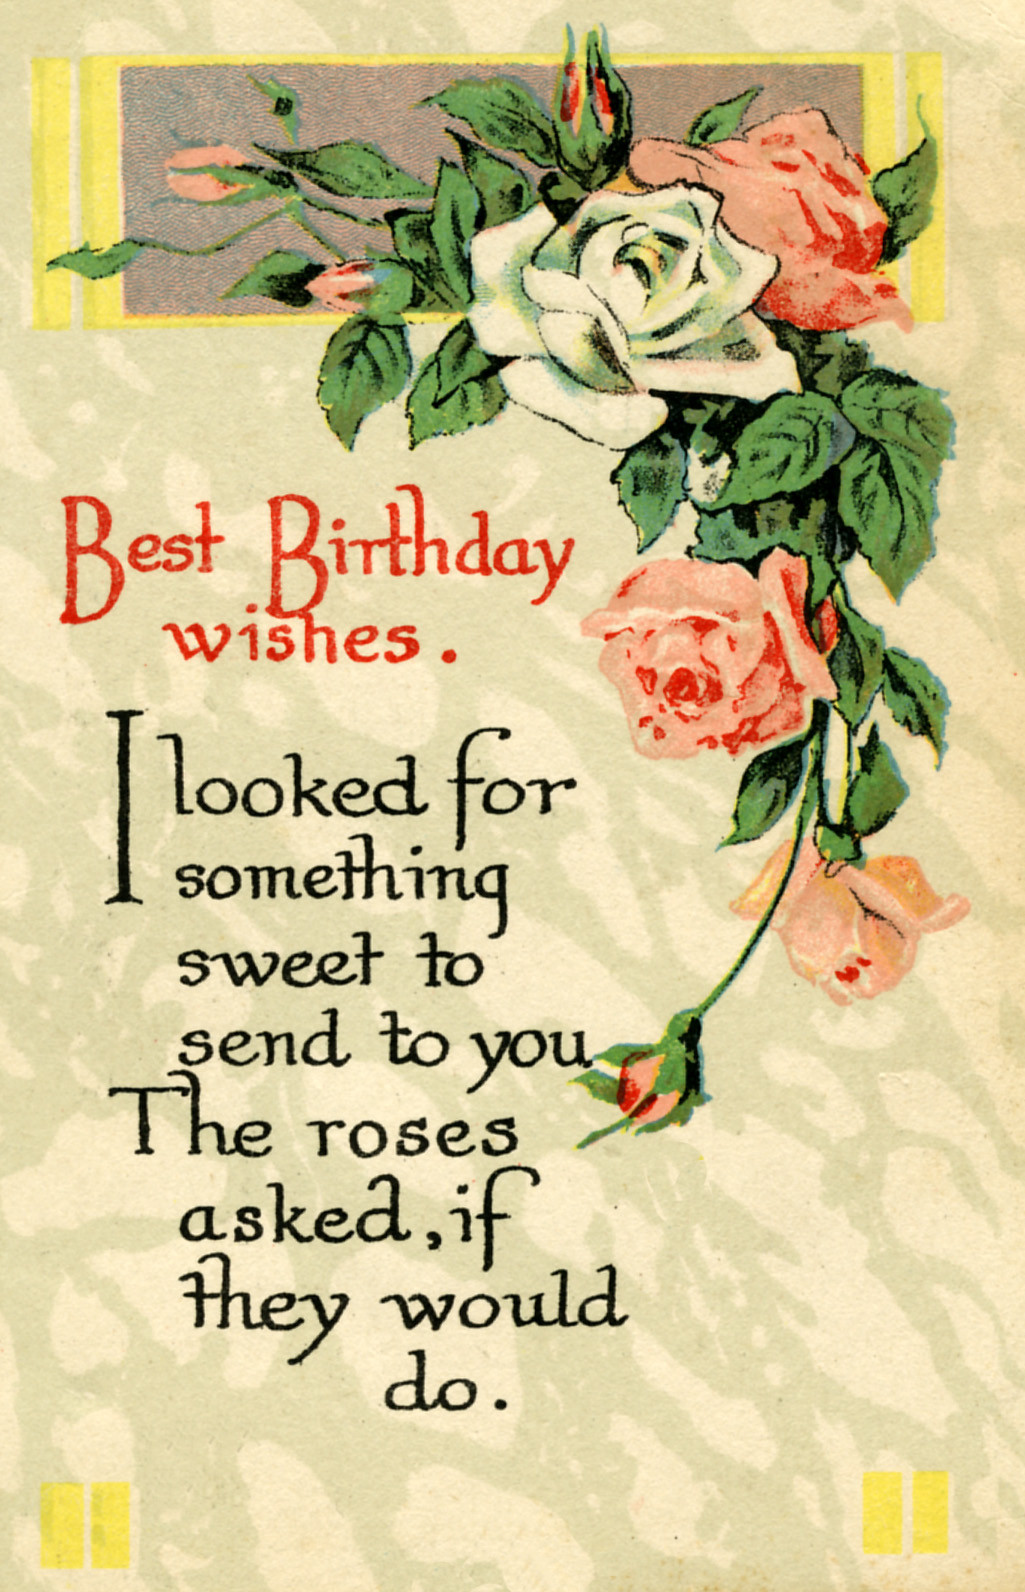 Happy Birthday Cards For Friends
 Best Happy Birthday Wishes For Friends – Themes pany